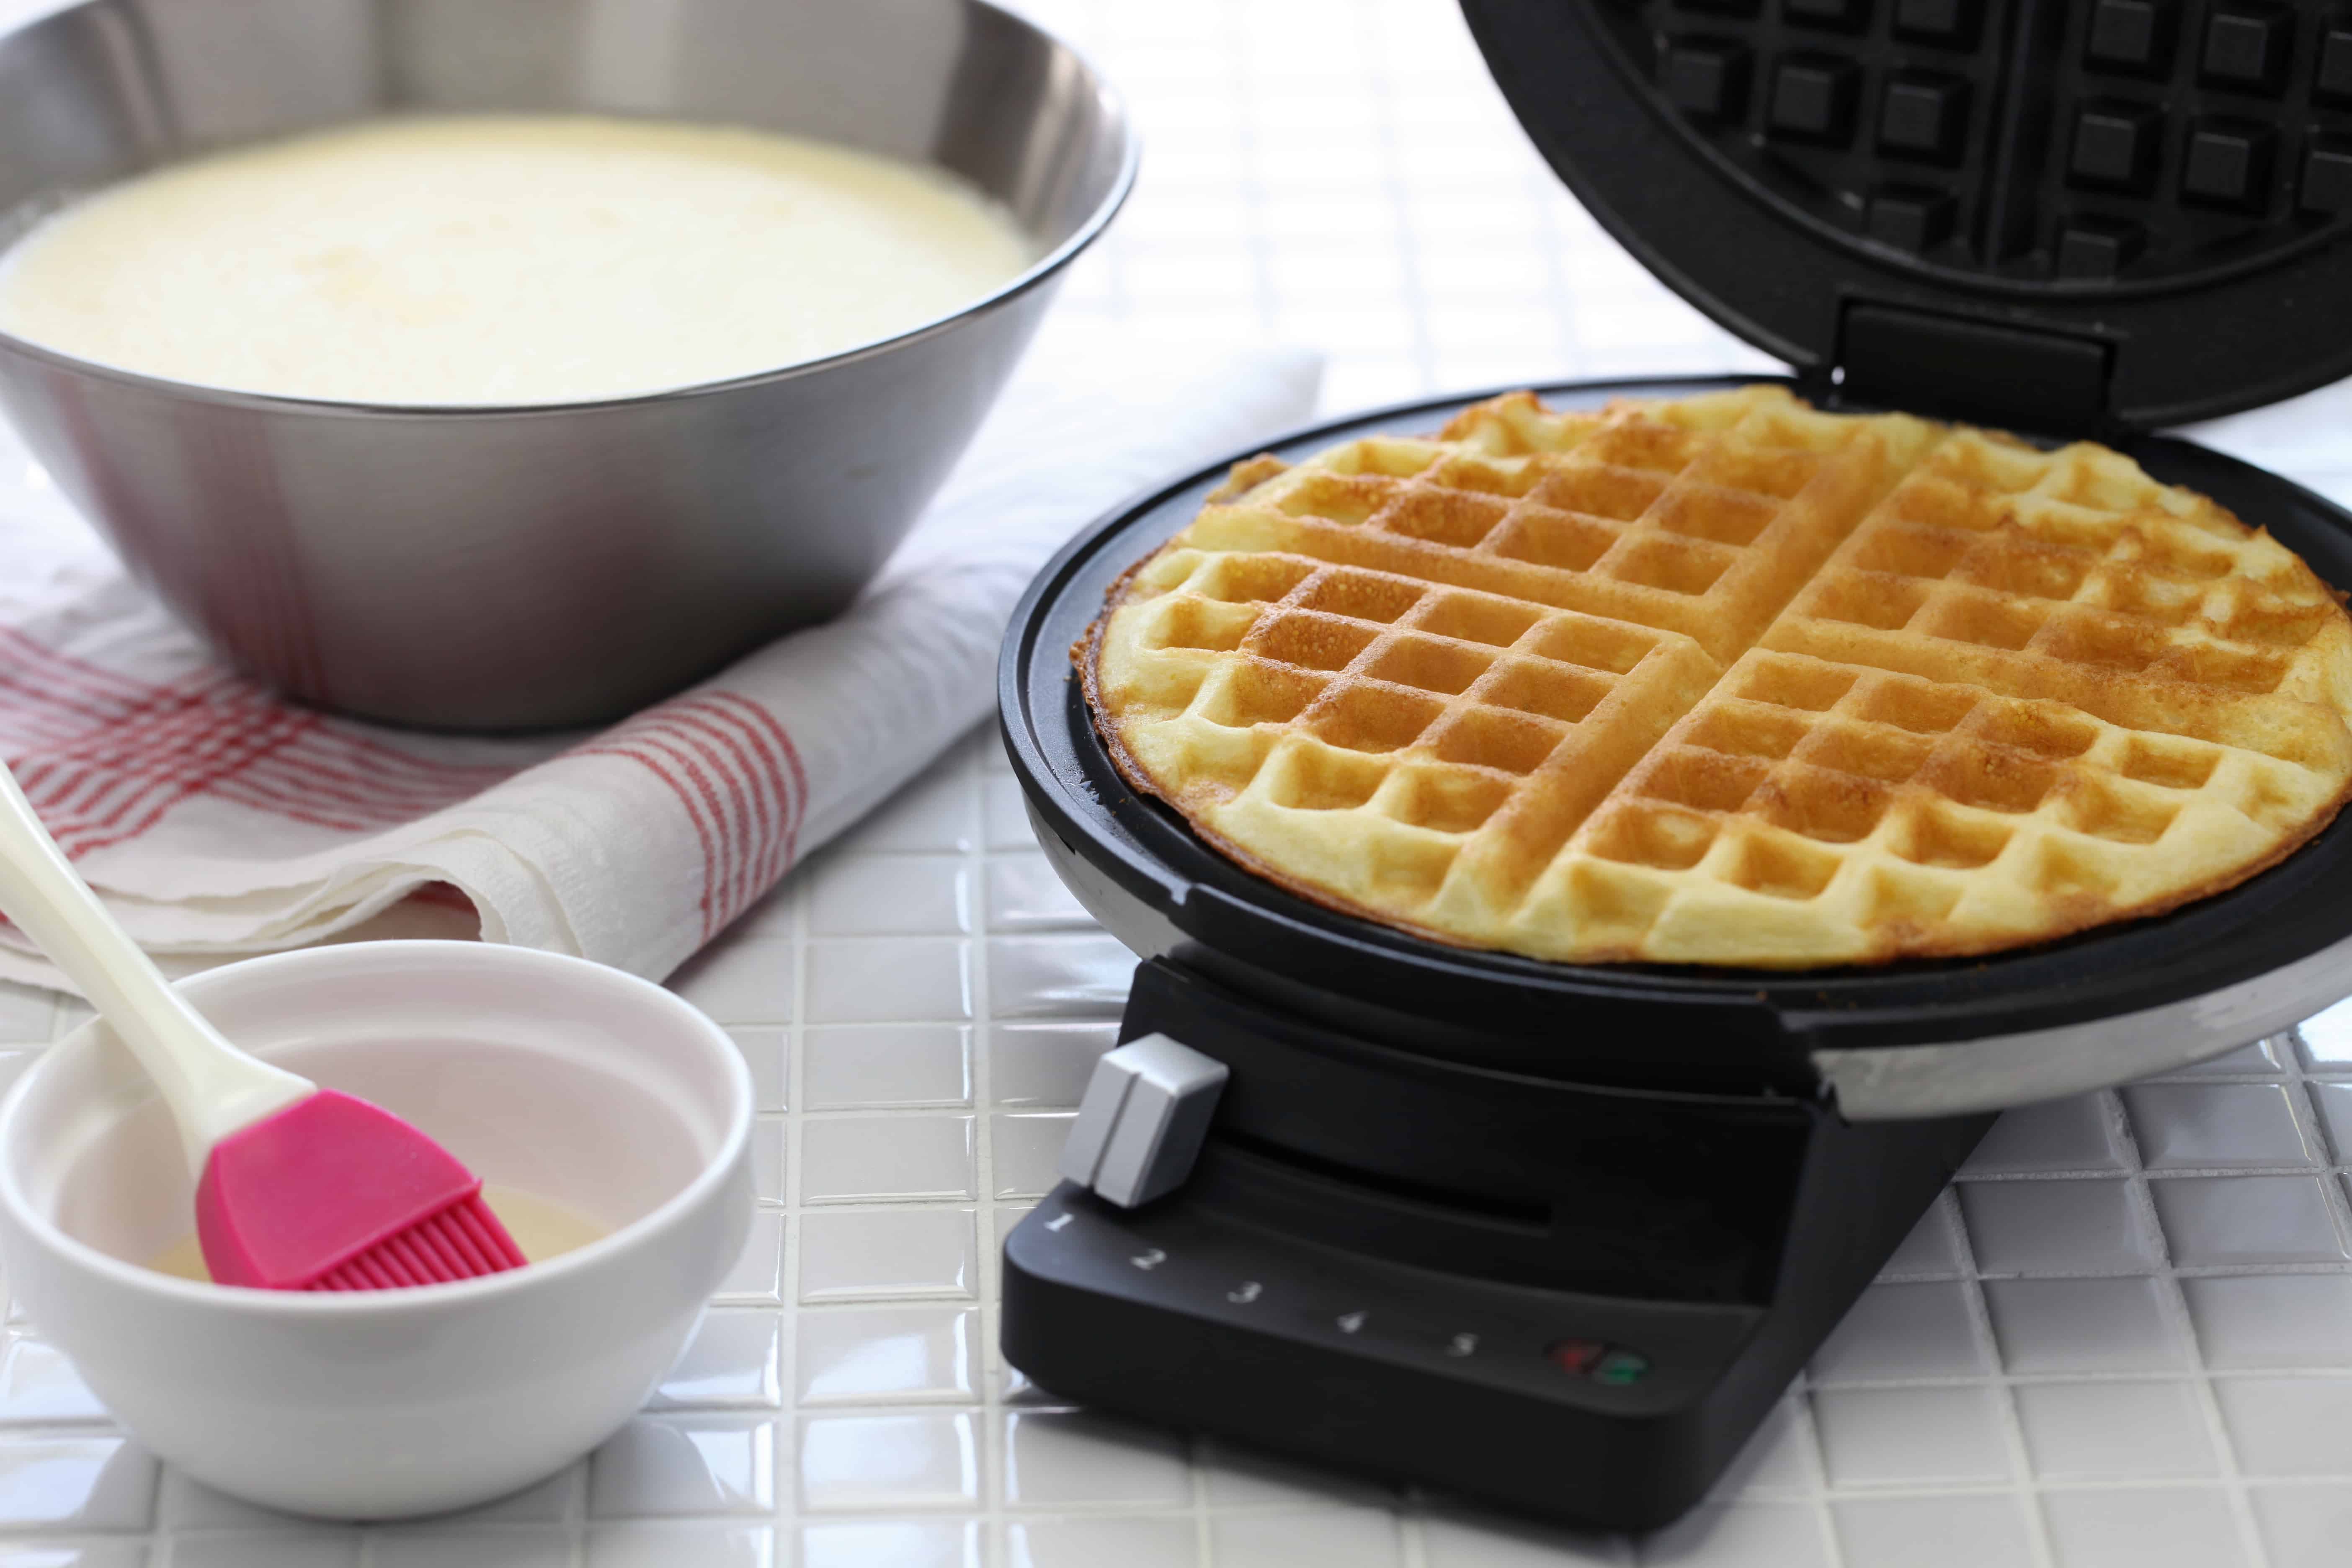 Chef McGuinness Shares a Recipe for National Waffle Day